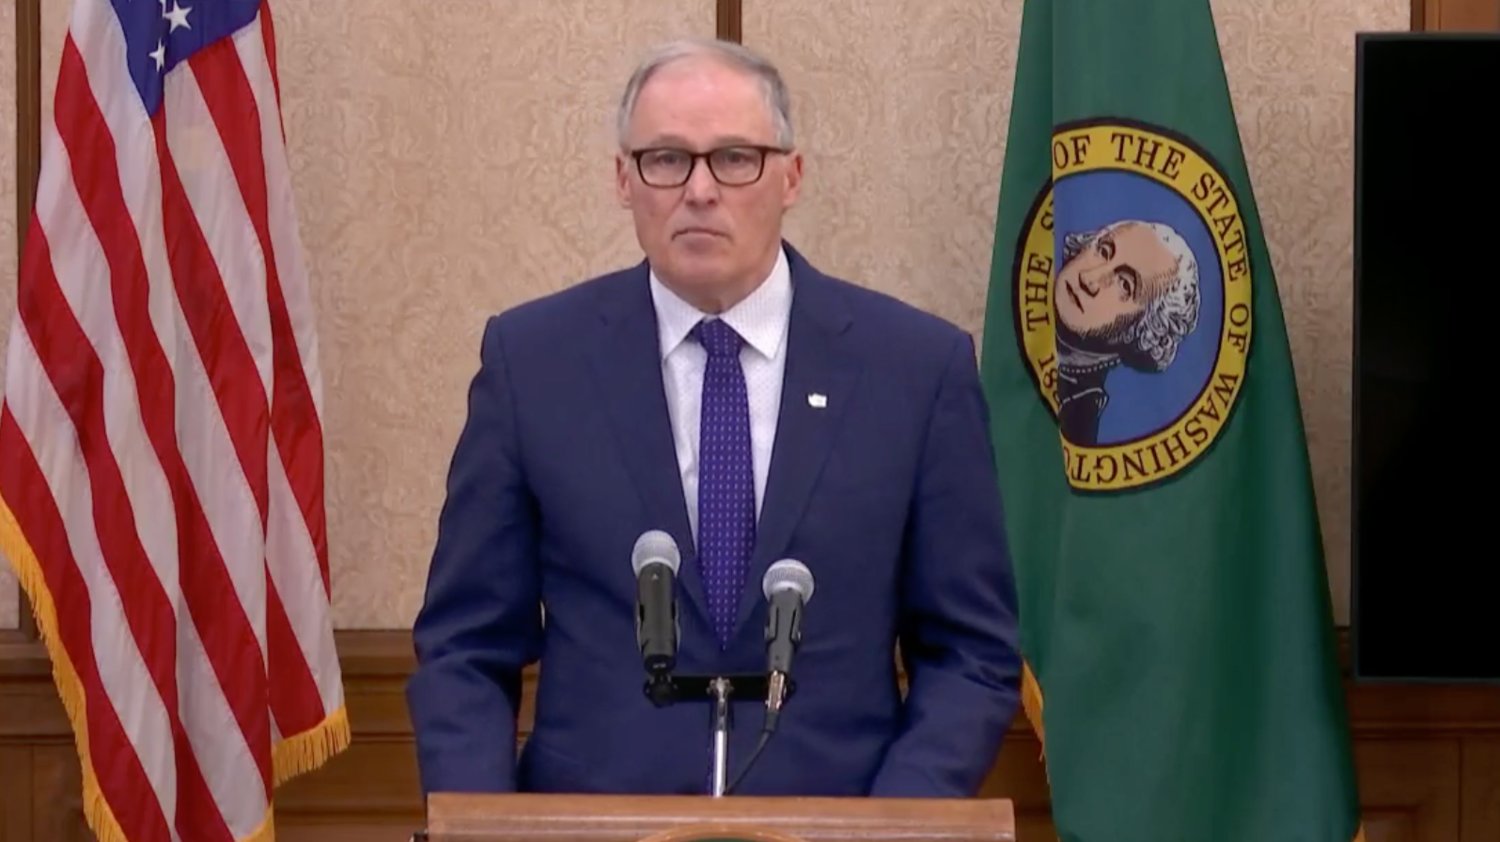 FILE PHOTO — Gov. Jay Inslee speaks at a press conference.